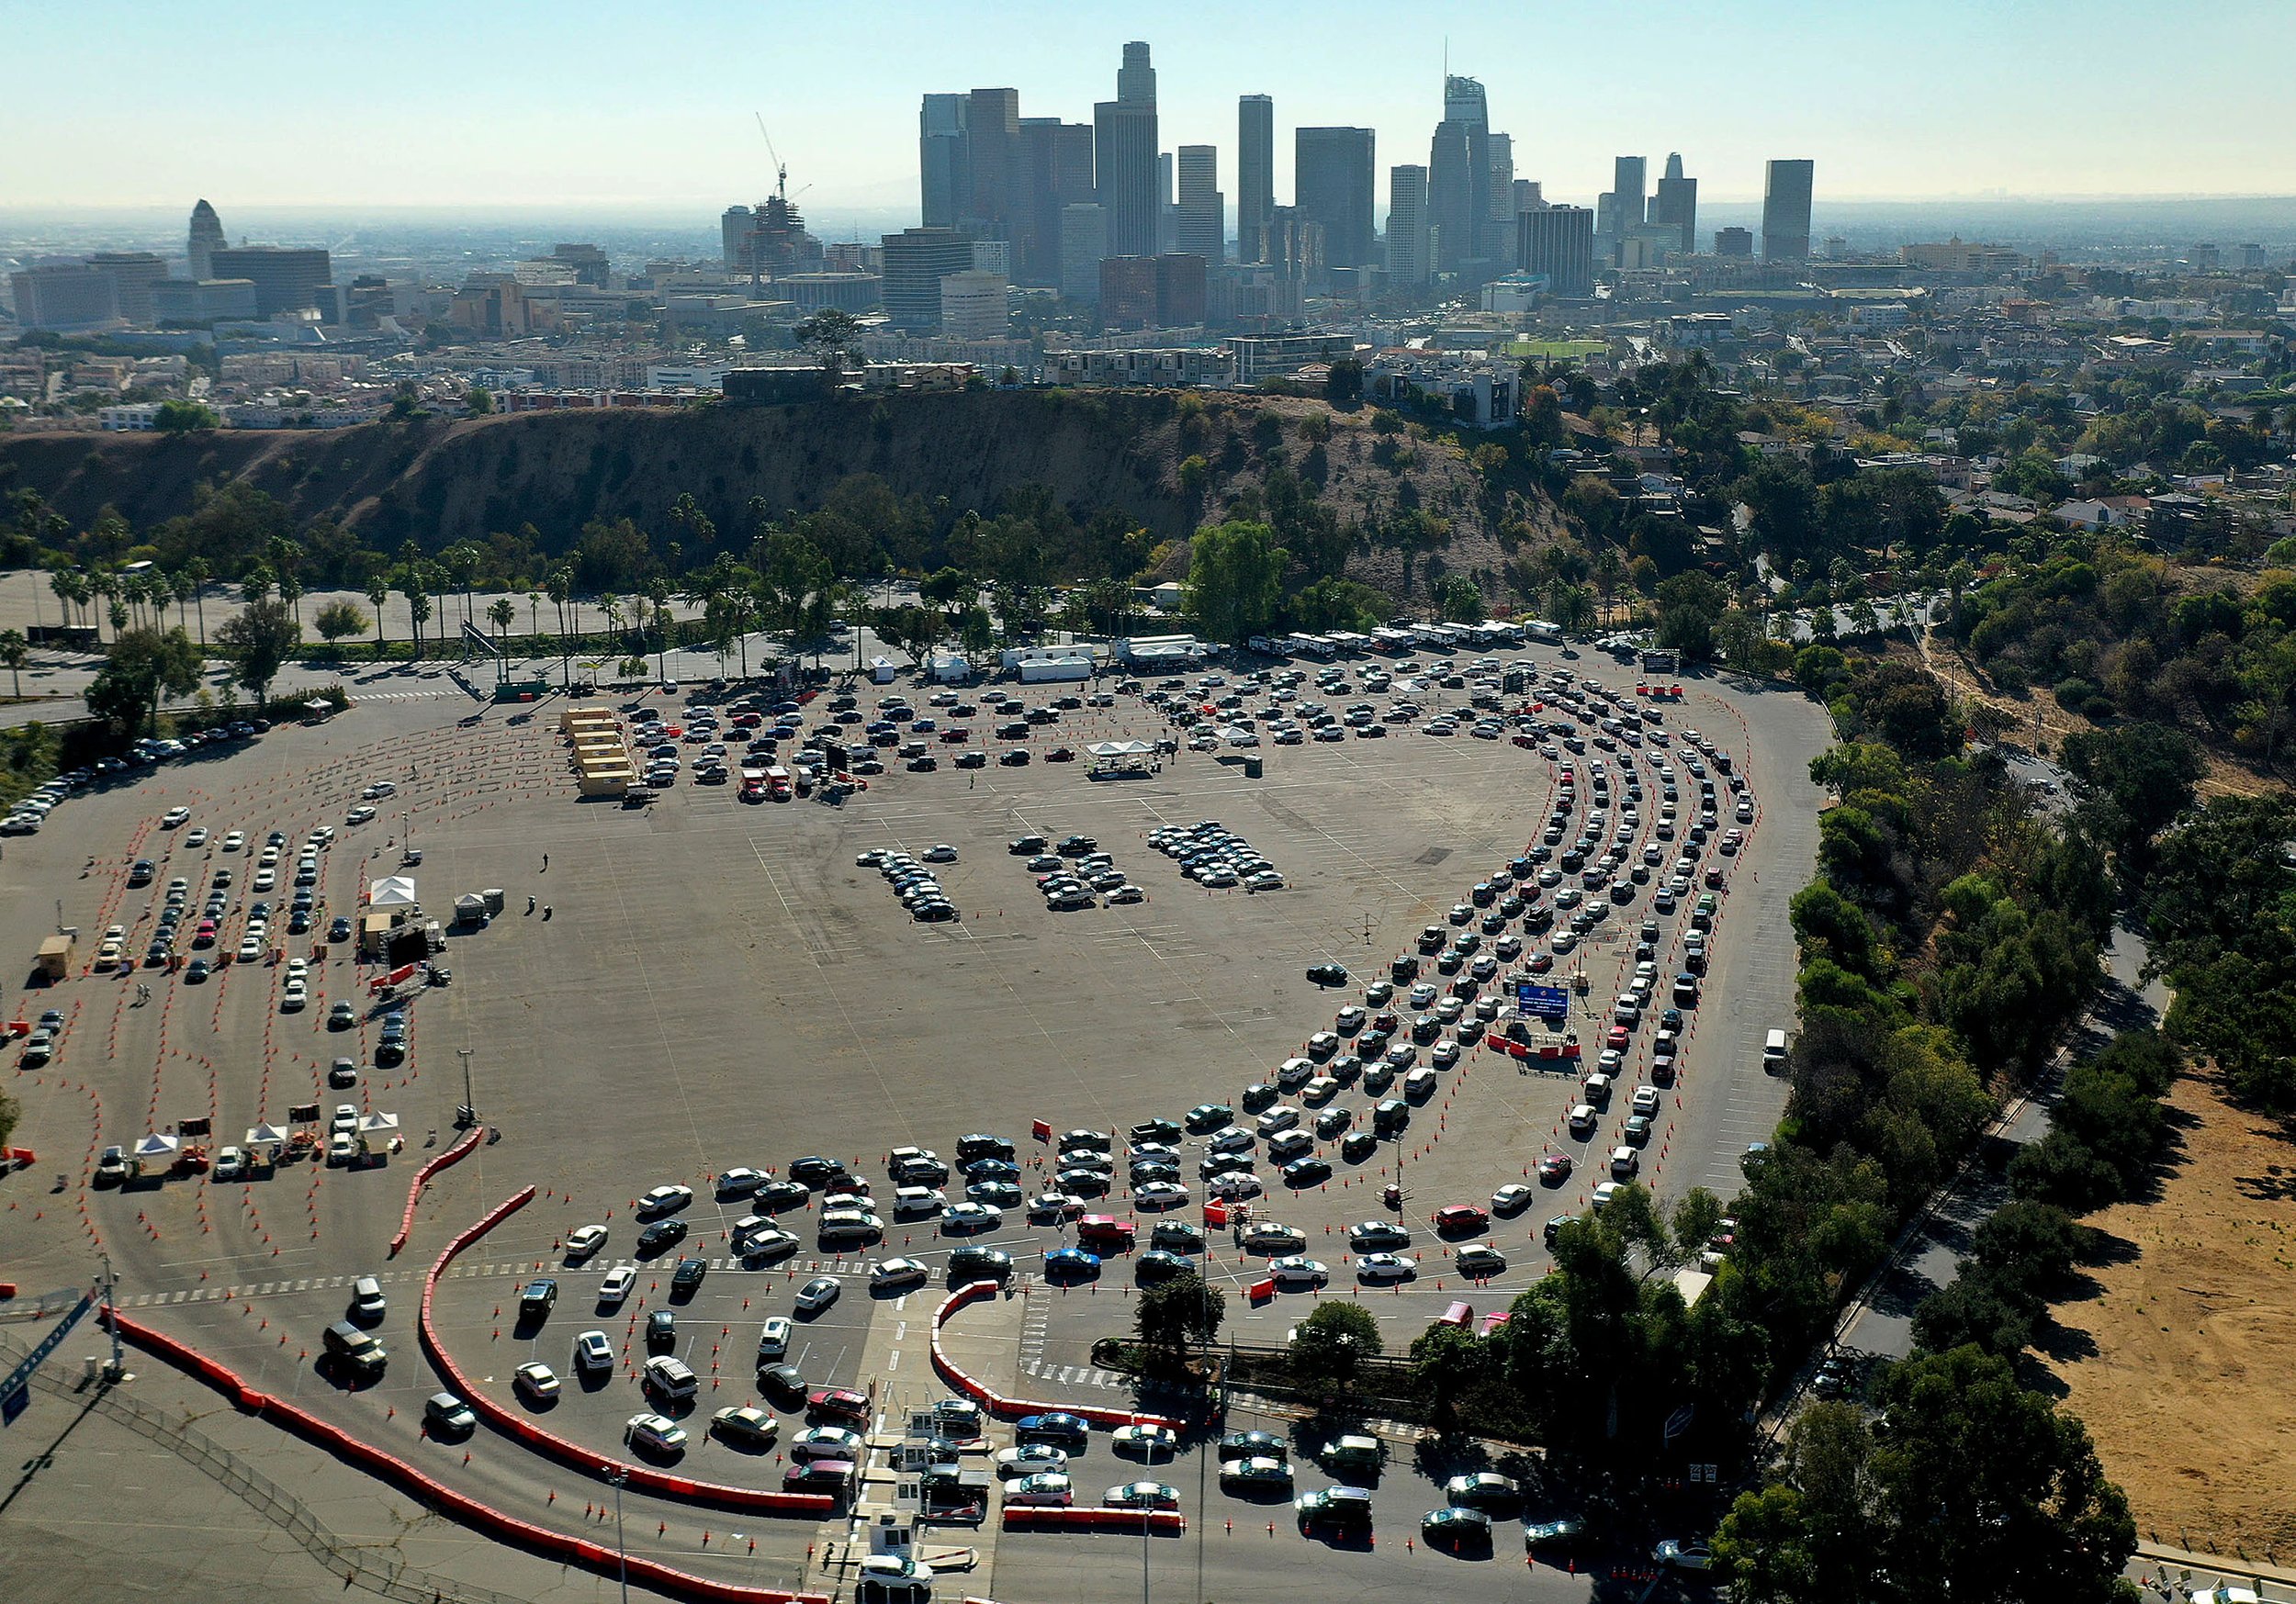  Covid-19 testing at the Dodger Stadium parking lot on Tuesday, November 17, 2020.  (Photo by Dean Musgrove, Los Angeles Daily News/SCNG) 